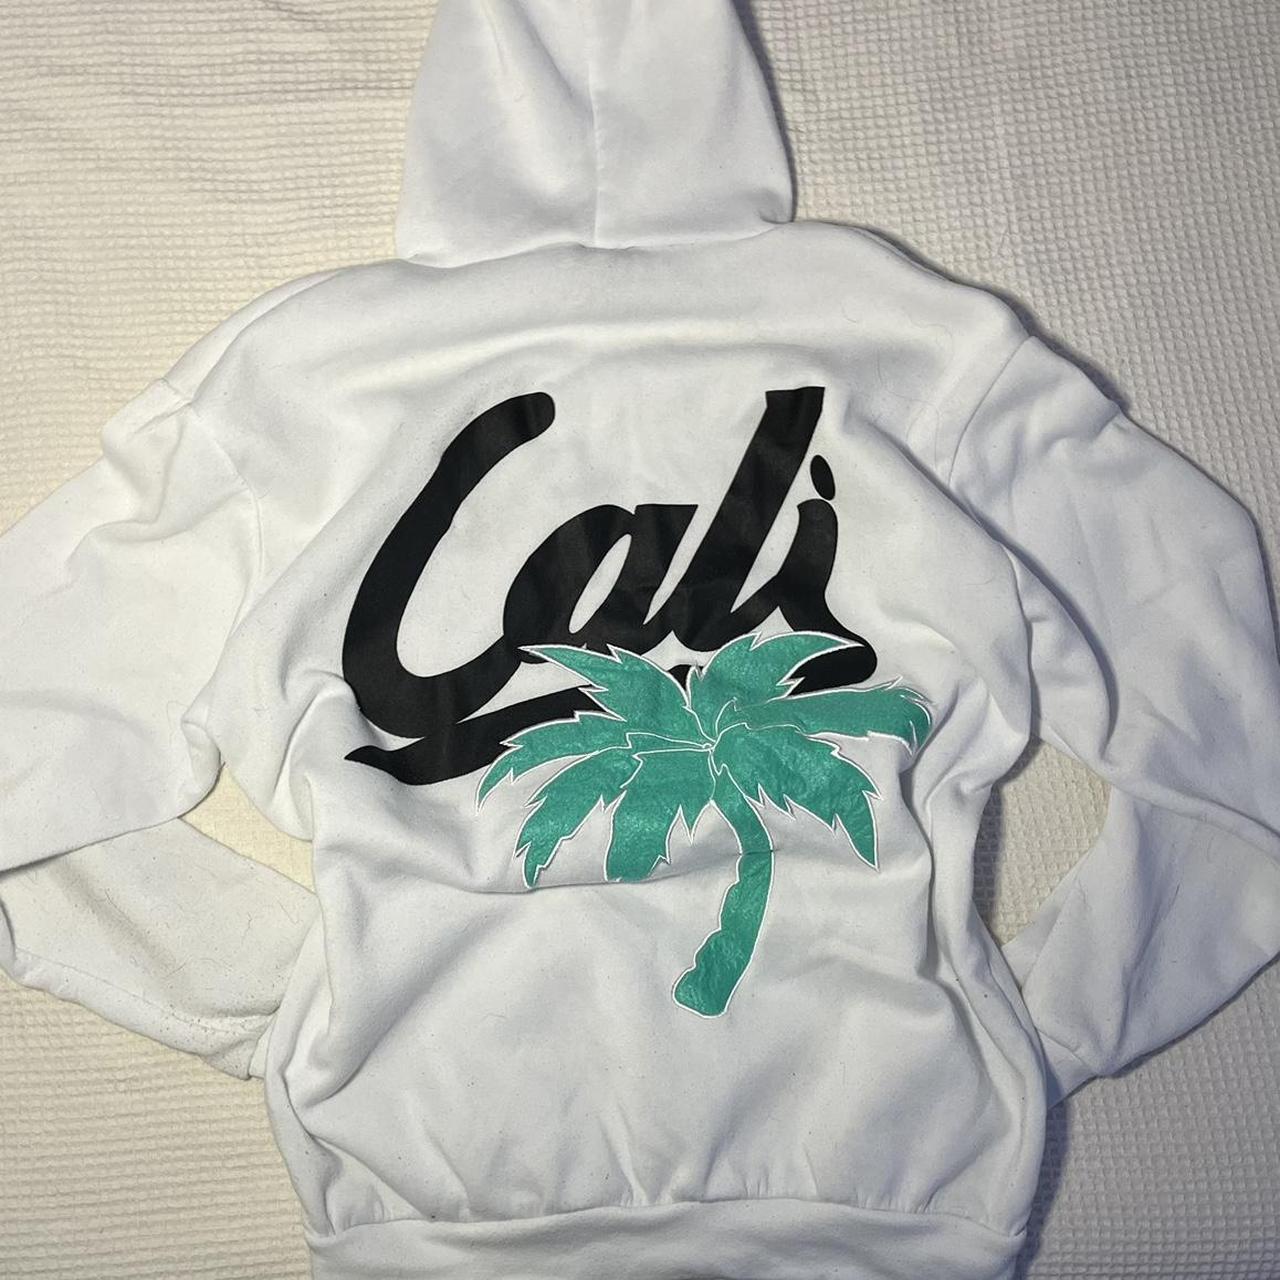 Cali hoodie some of the label is starting to peel - Depop